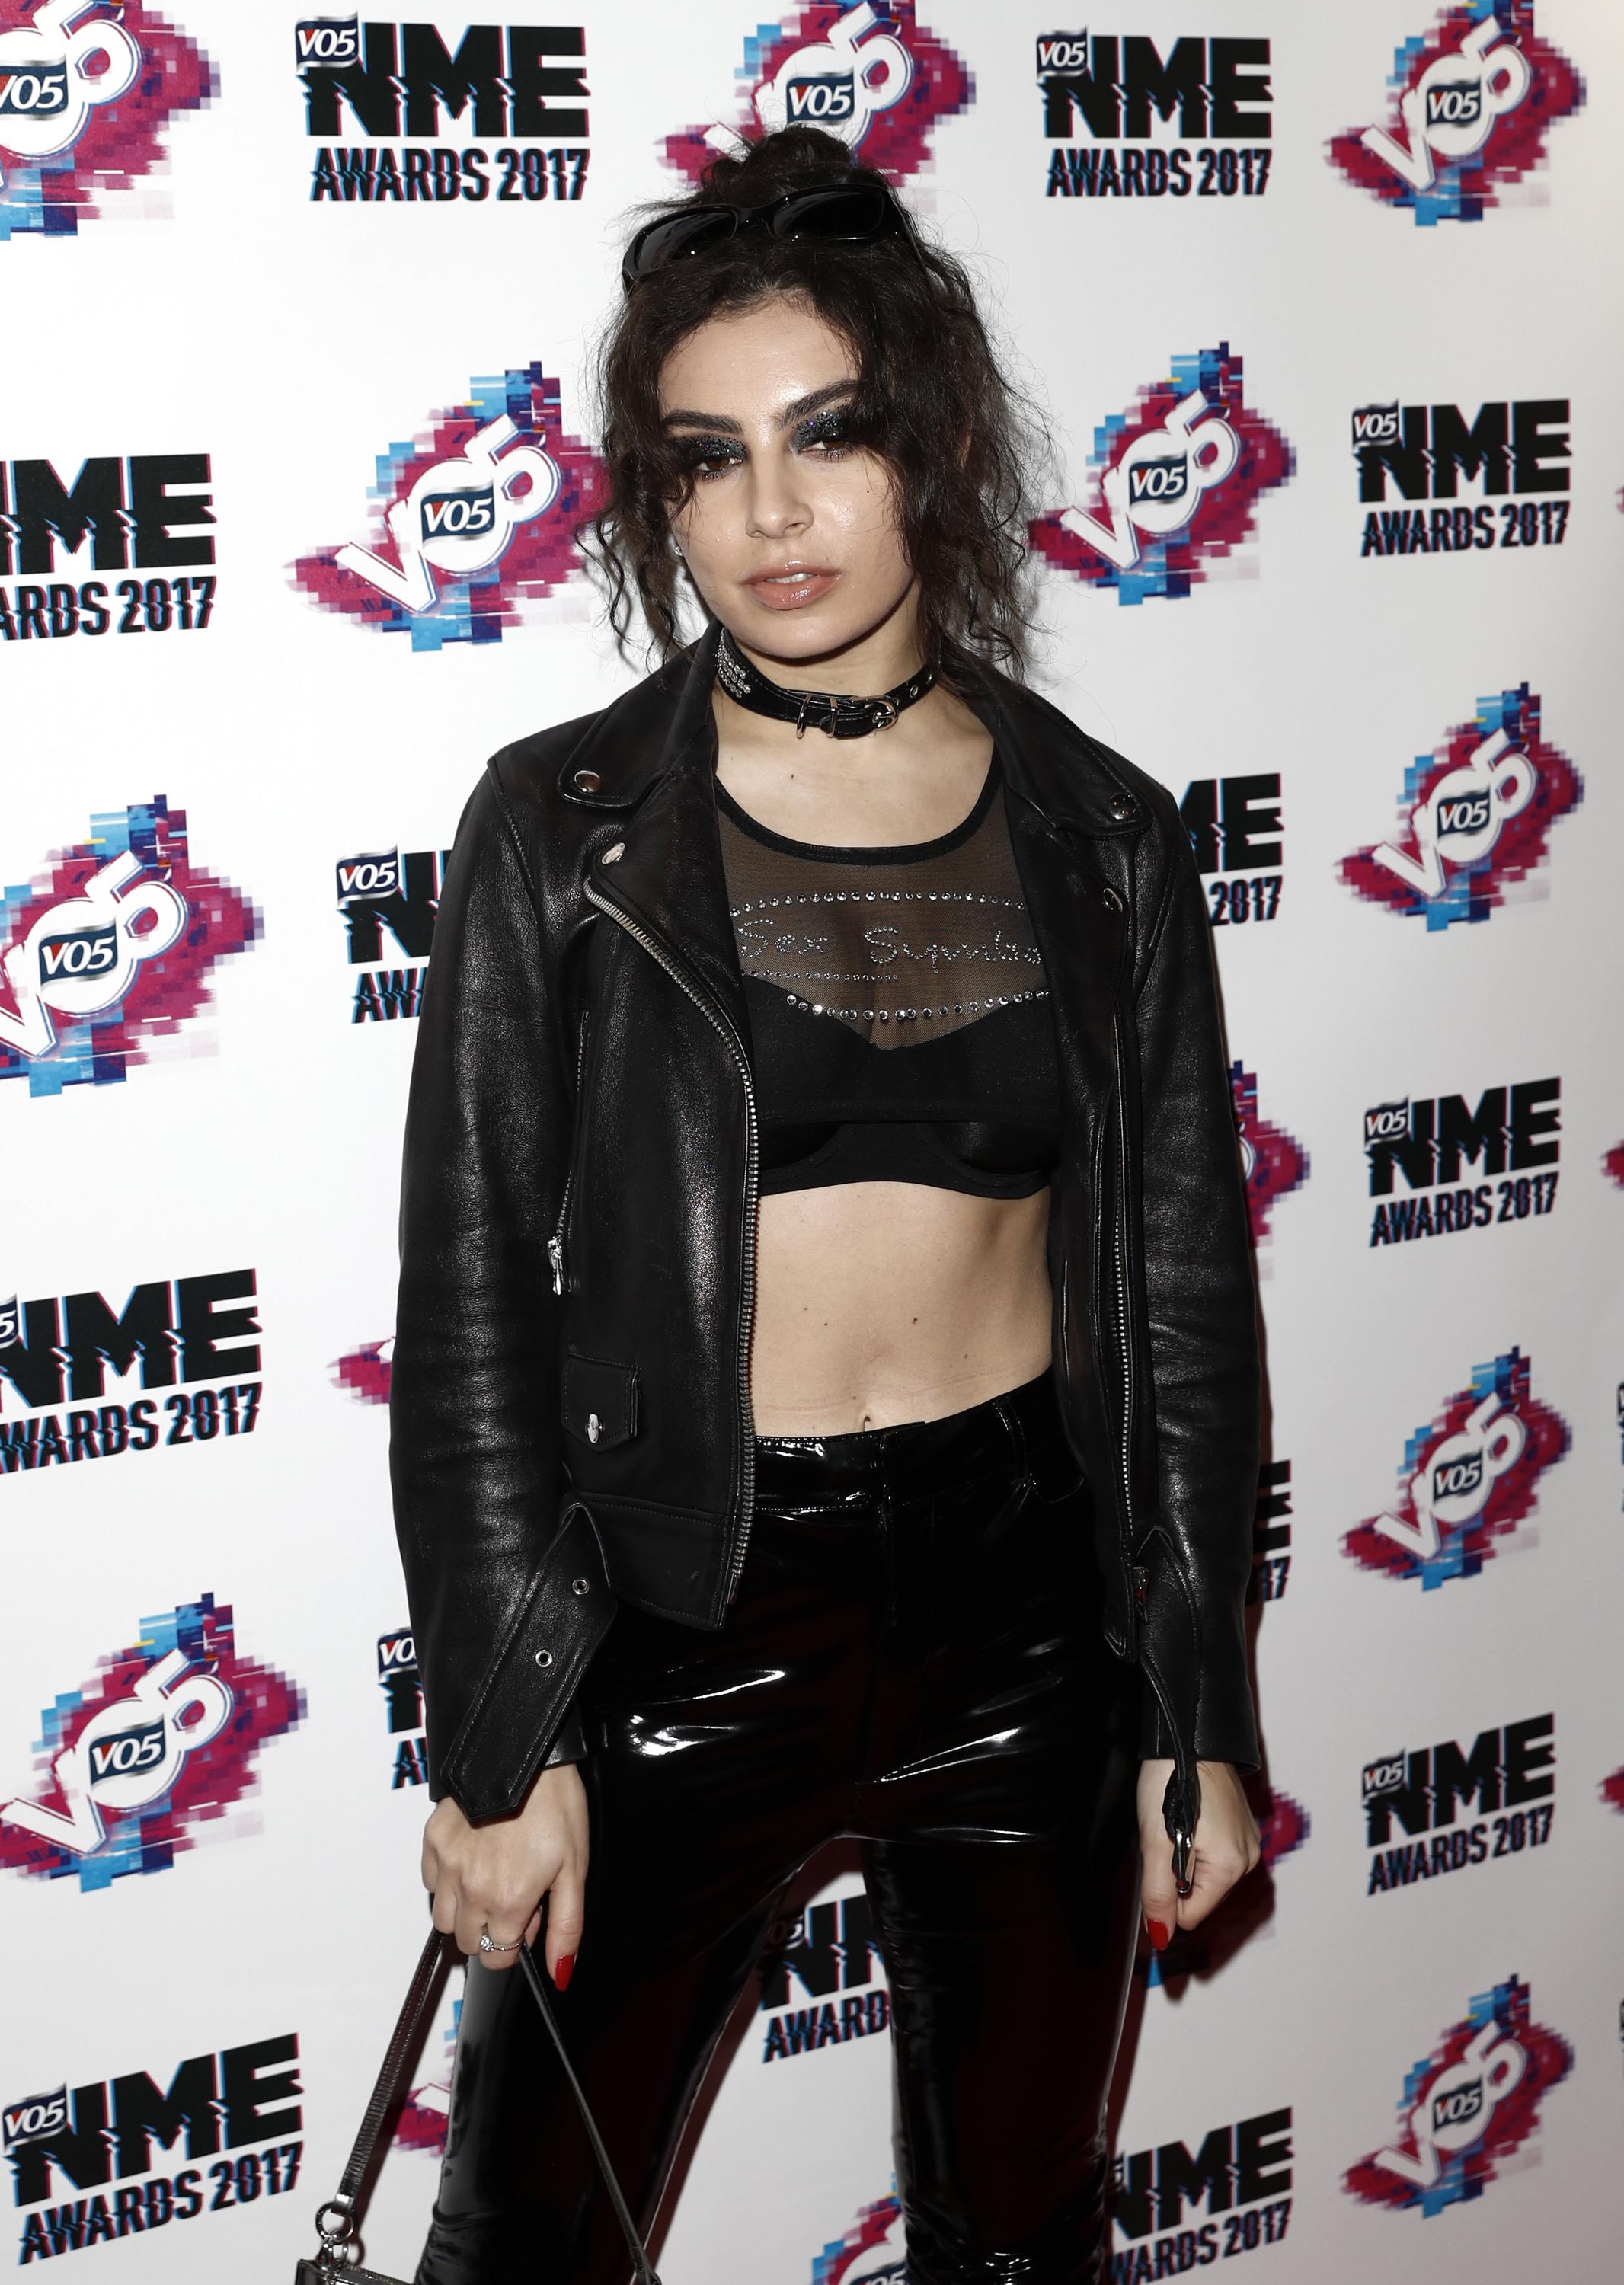 Charli XCX attends NME Awards